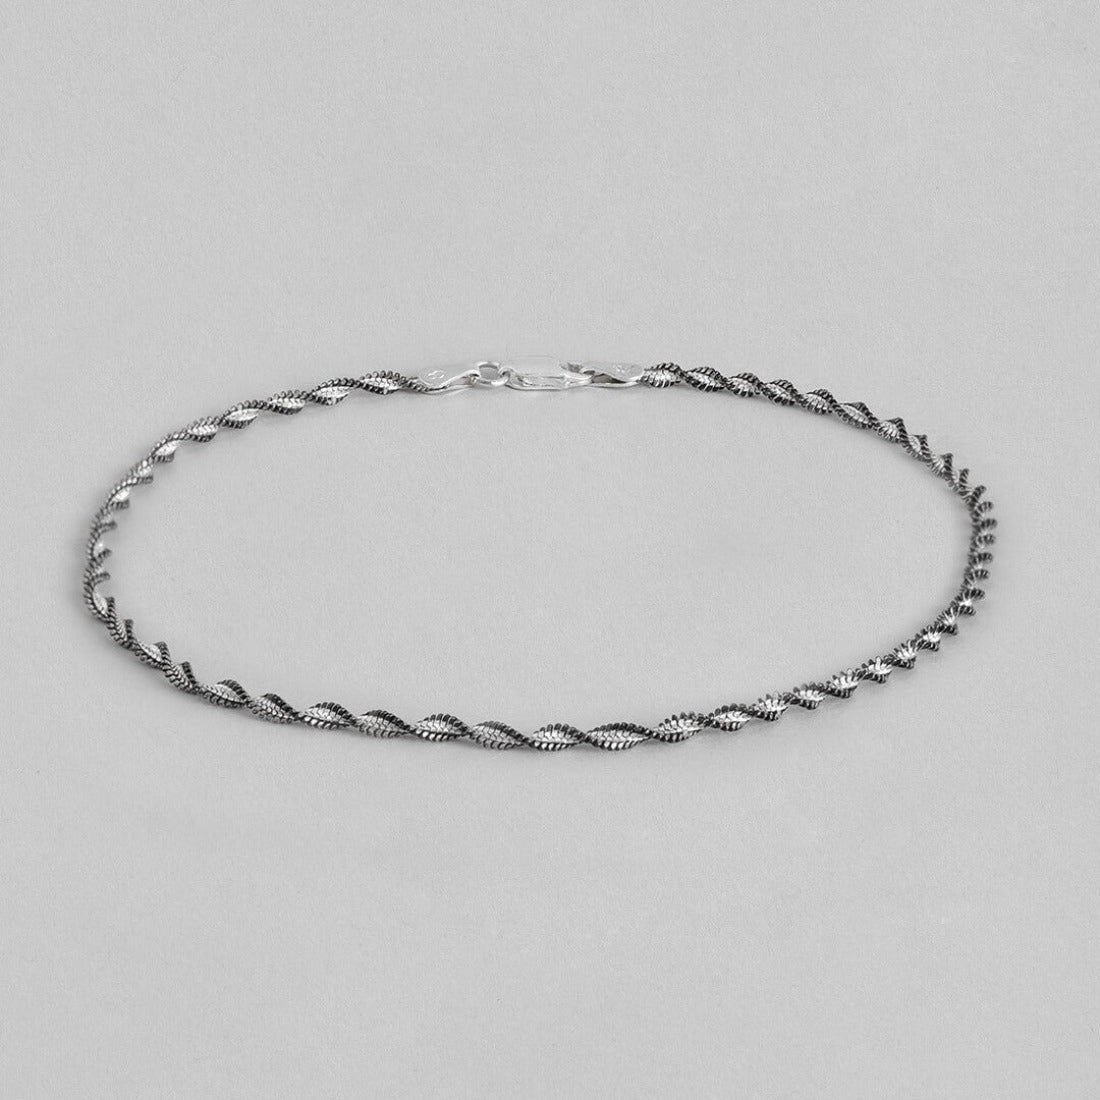 Entangled in Love 925 Sterling Silver Anklet - Valentines Edition With Gift Box